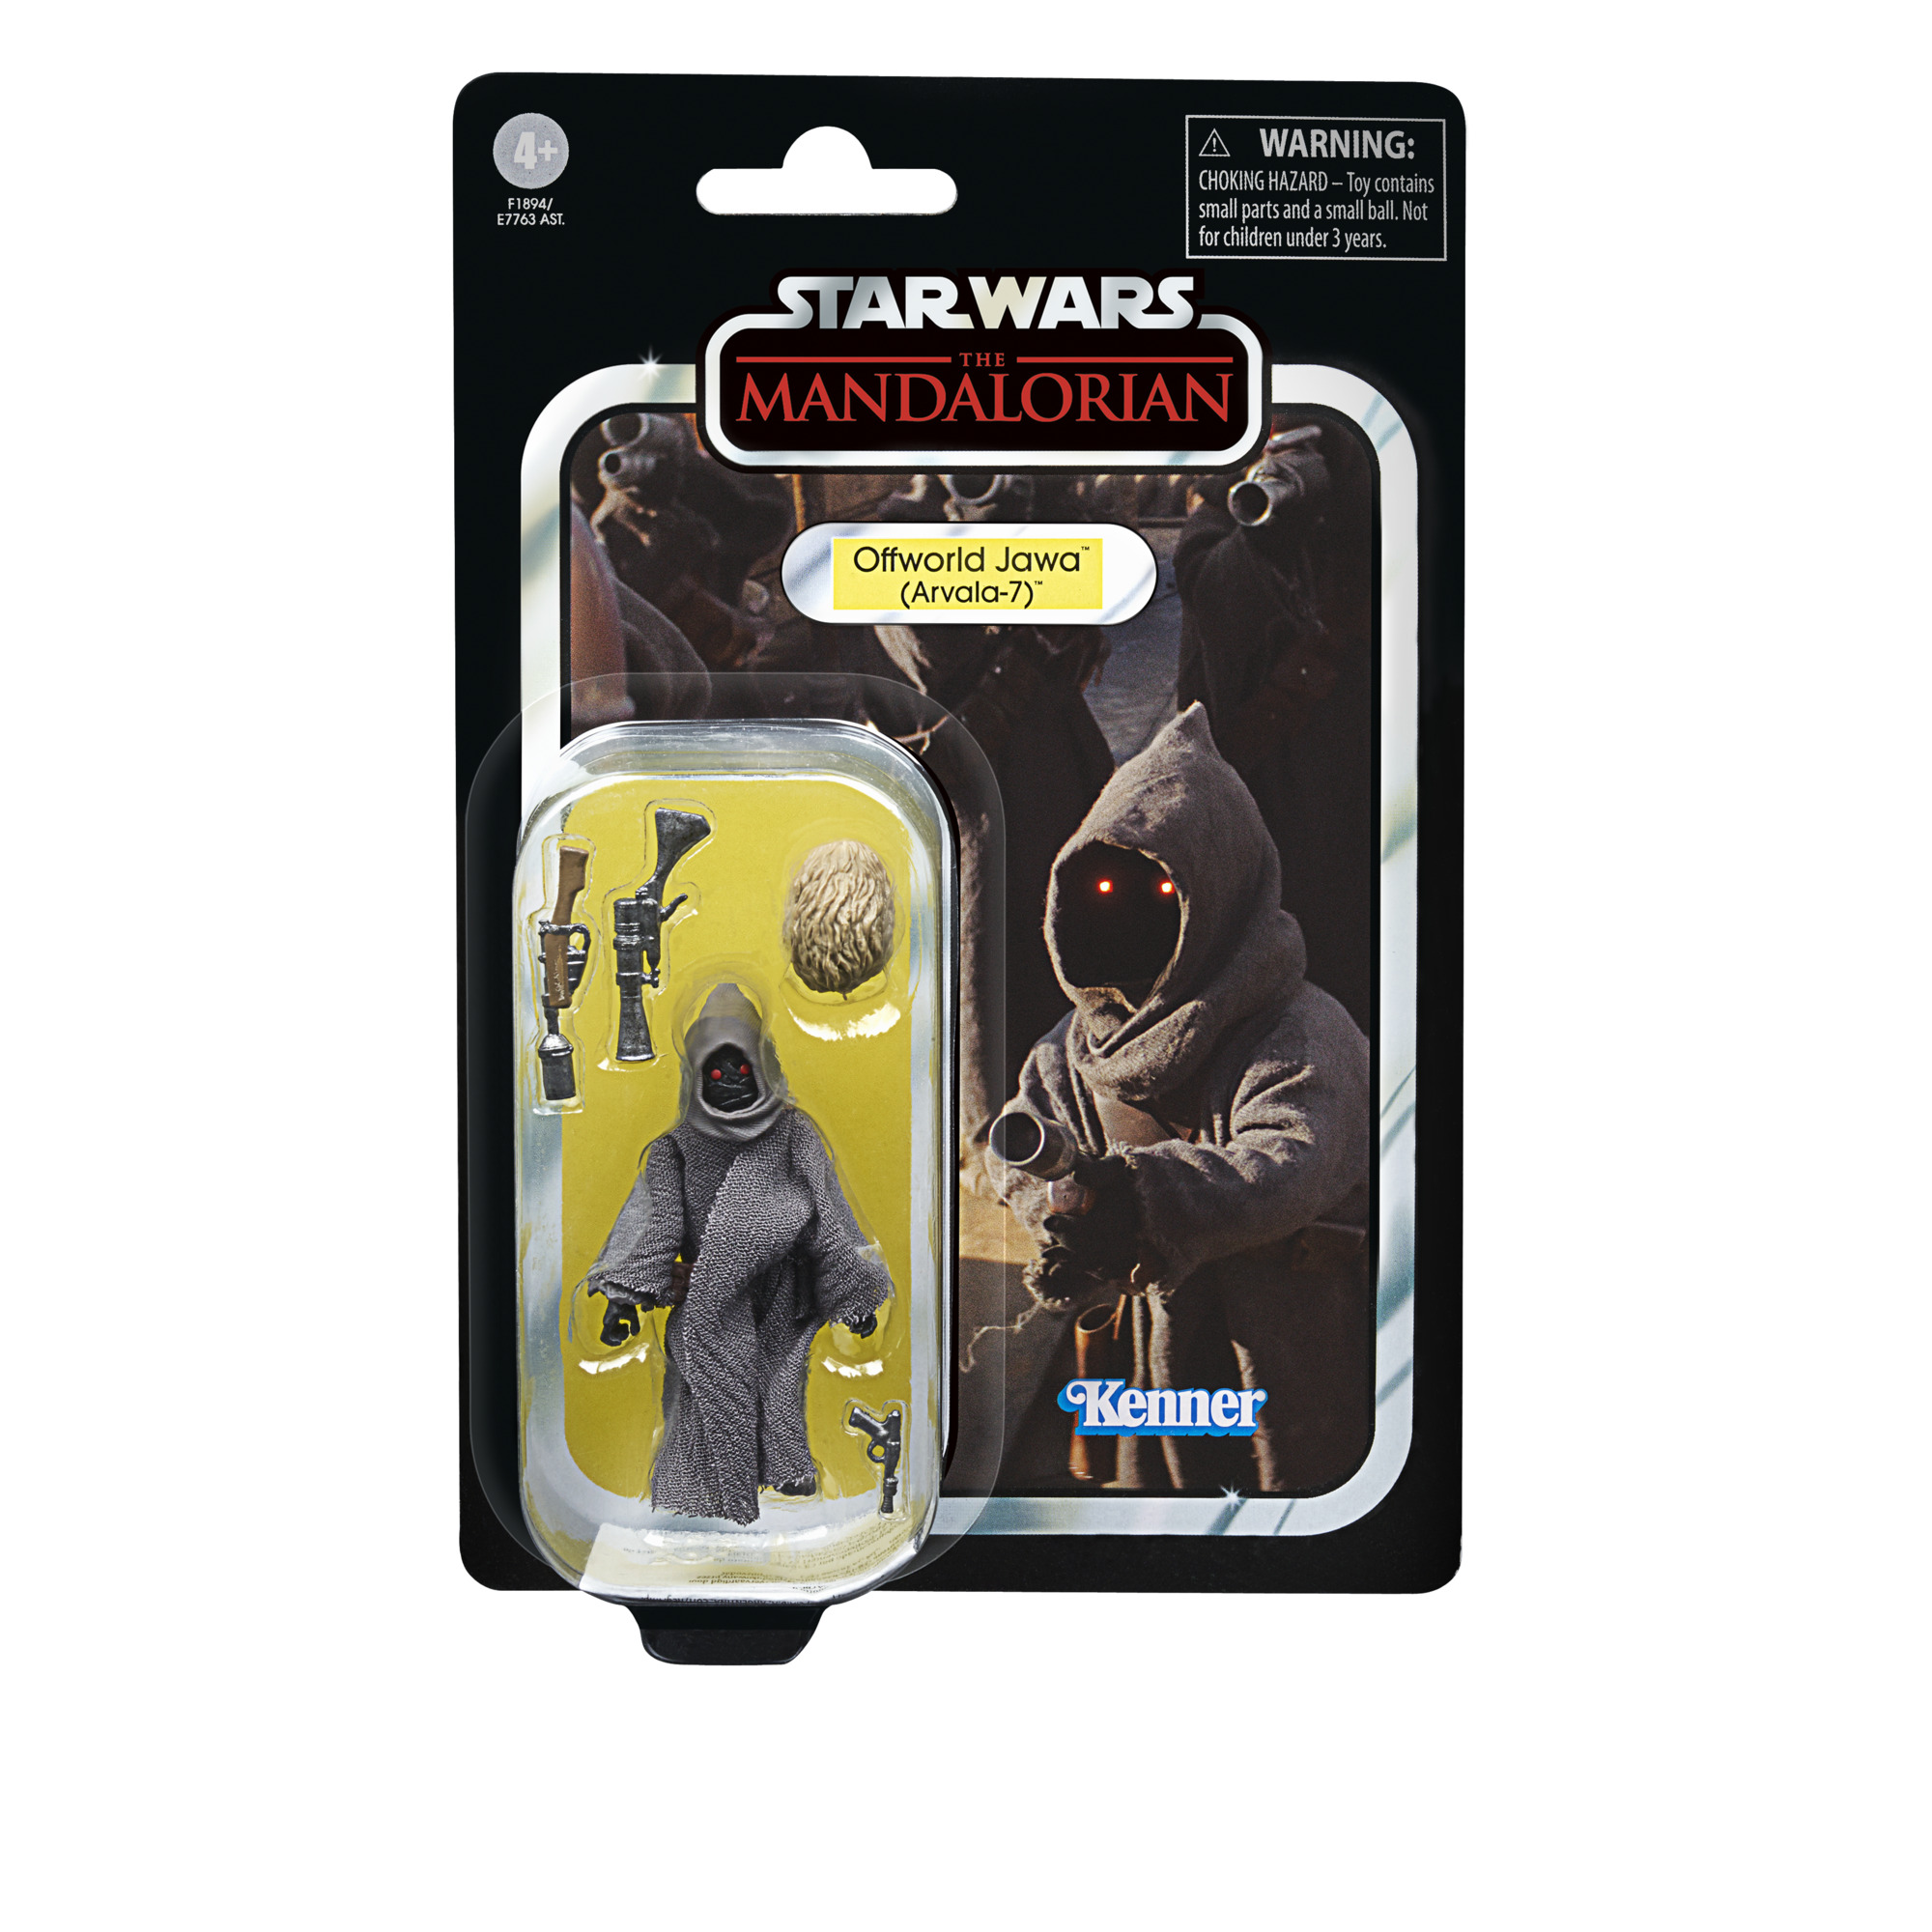 Star Wars The Vintage Collection Offworld Jawa (Arvala-7) F18945L00 5010993834389